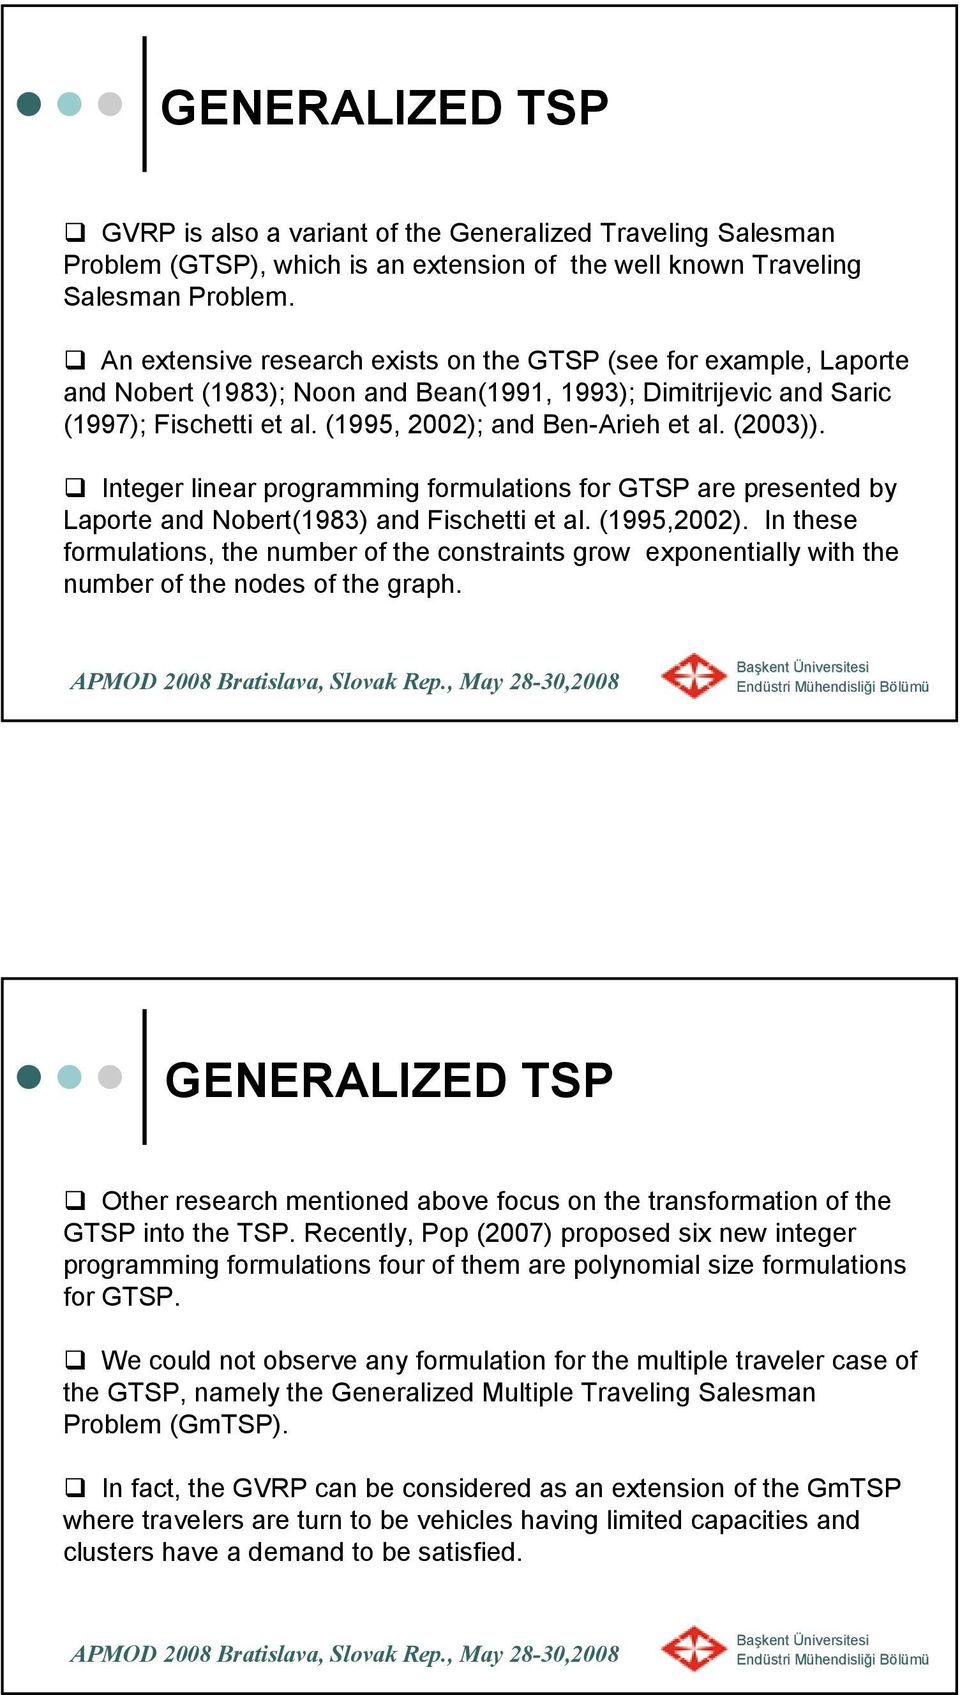 (2003)). Integer linear programming formulations for GTSP are presented by Laporte and Nobert(1983) and Fischetti et al. (1995,2002).